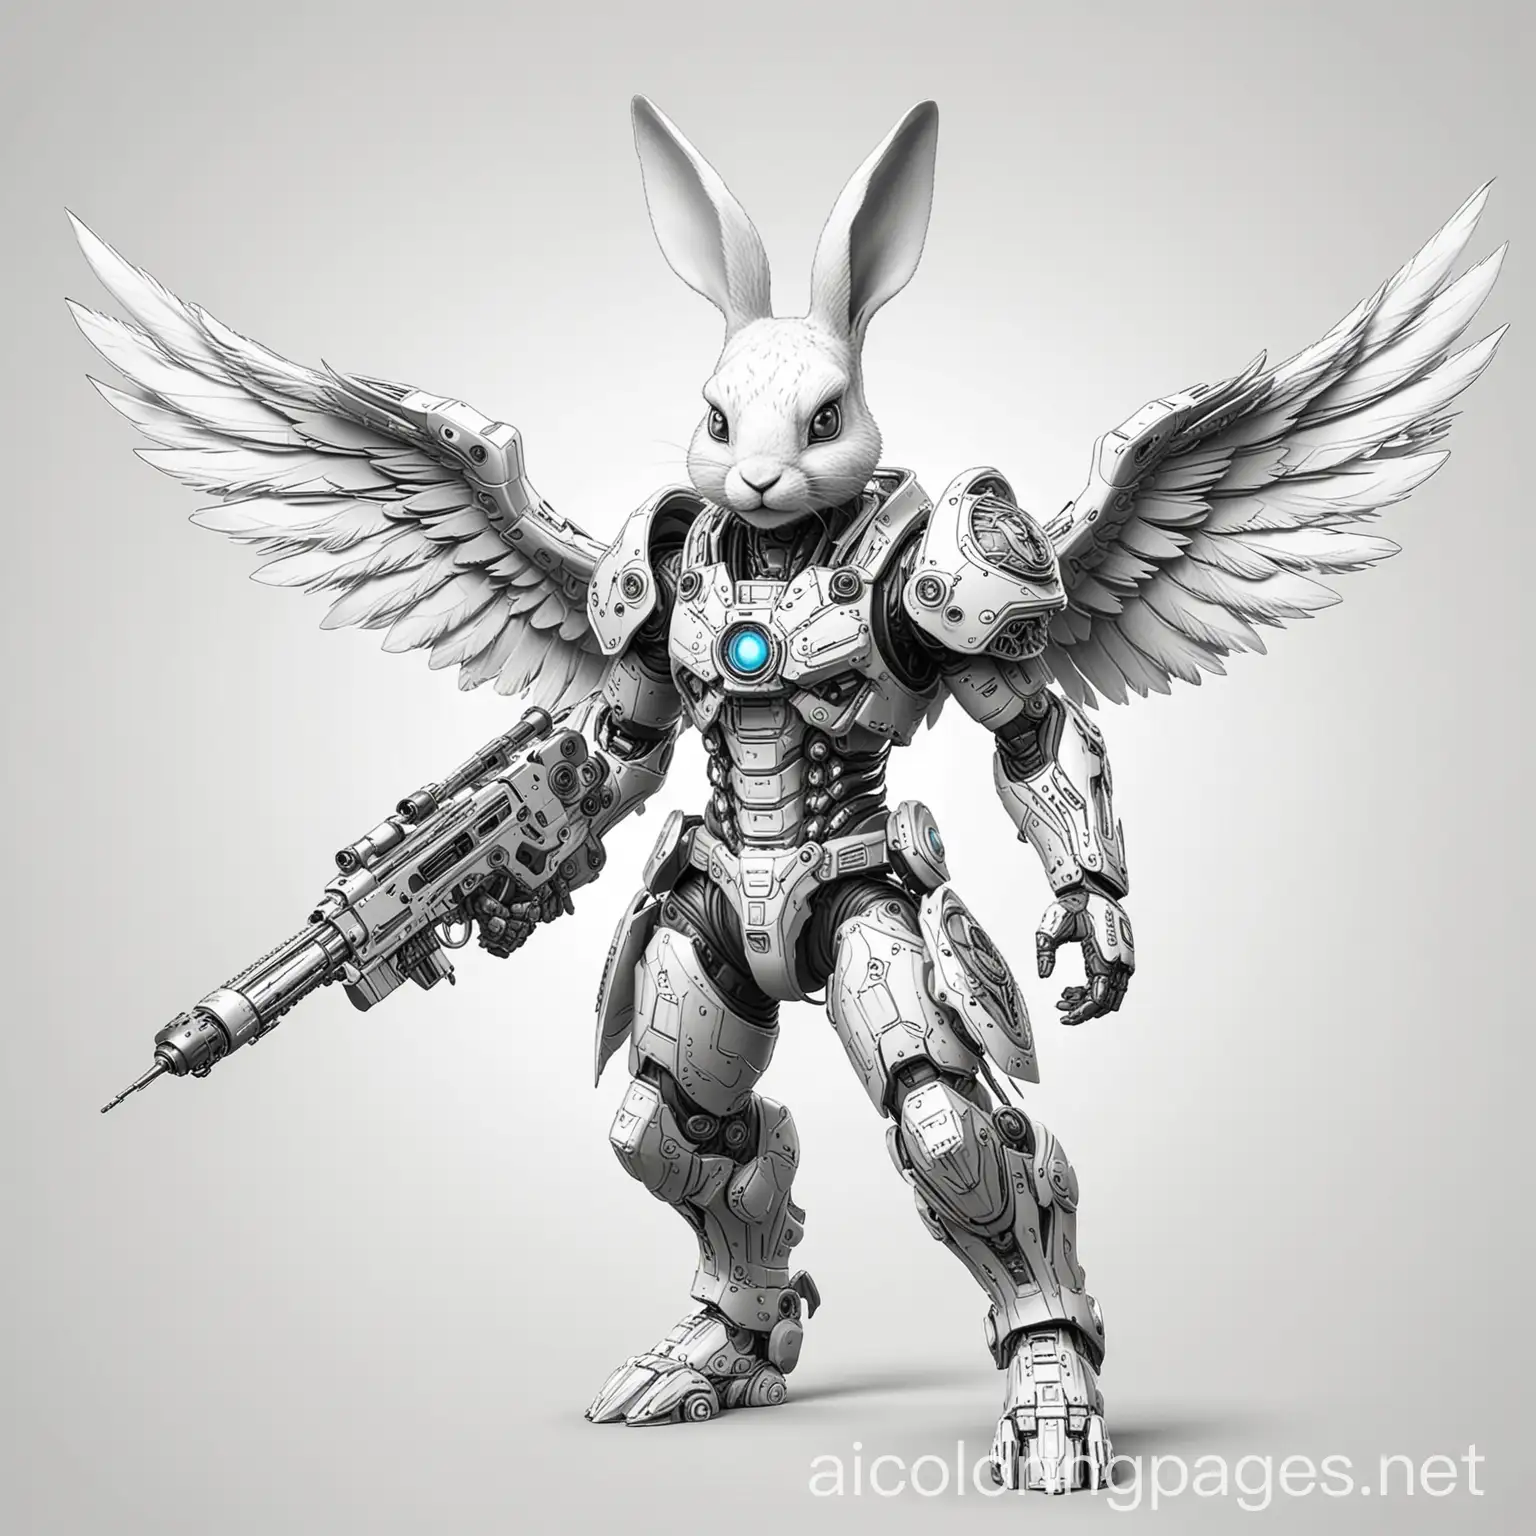 Cybernetic-Rabbit-Warrior-with-Ray-Gun-and-Wings-Coloring-Page